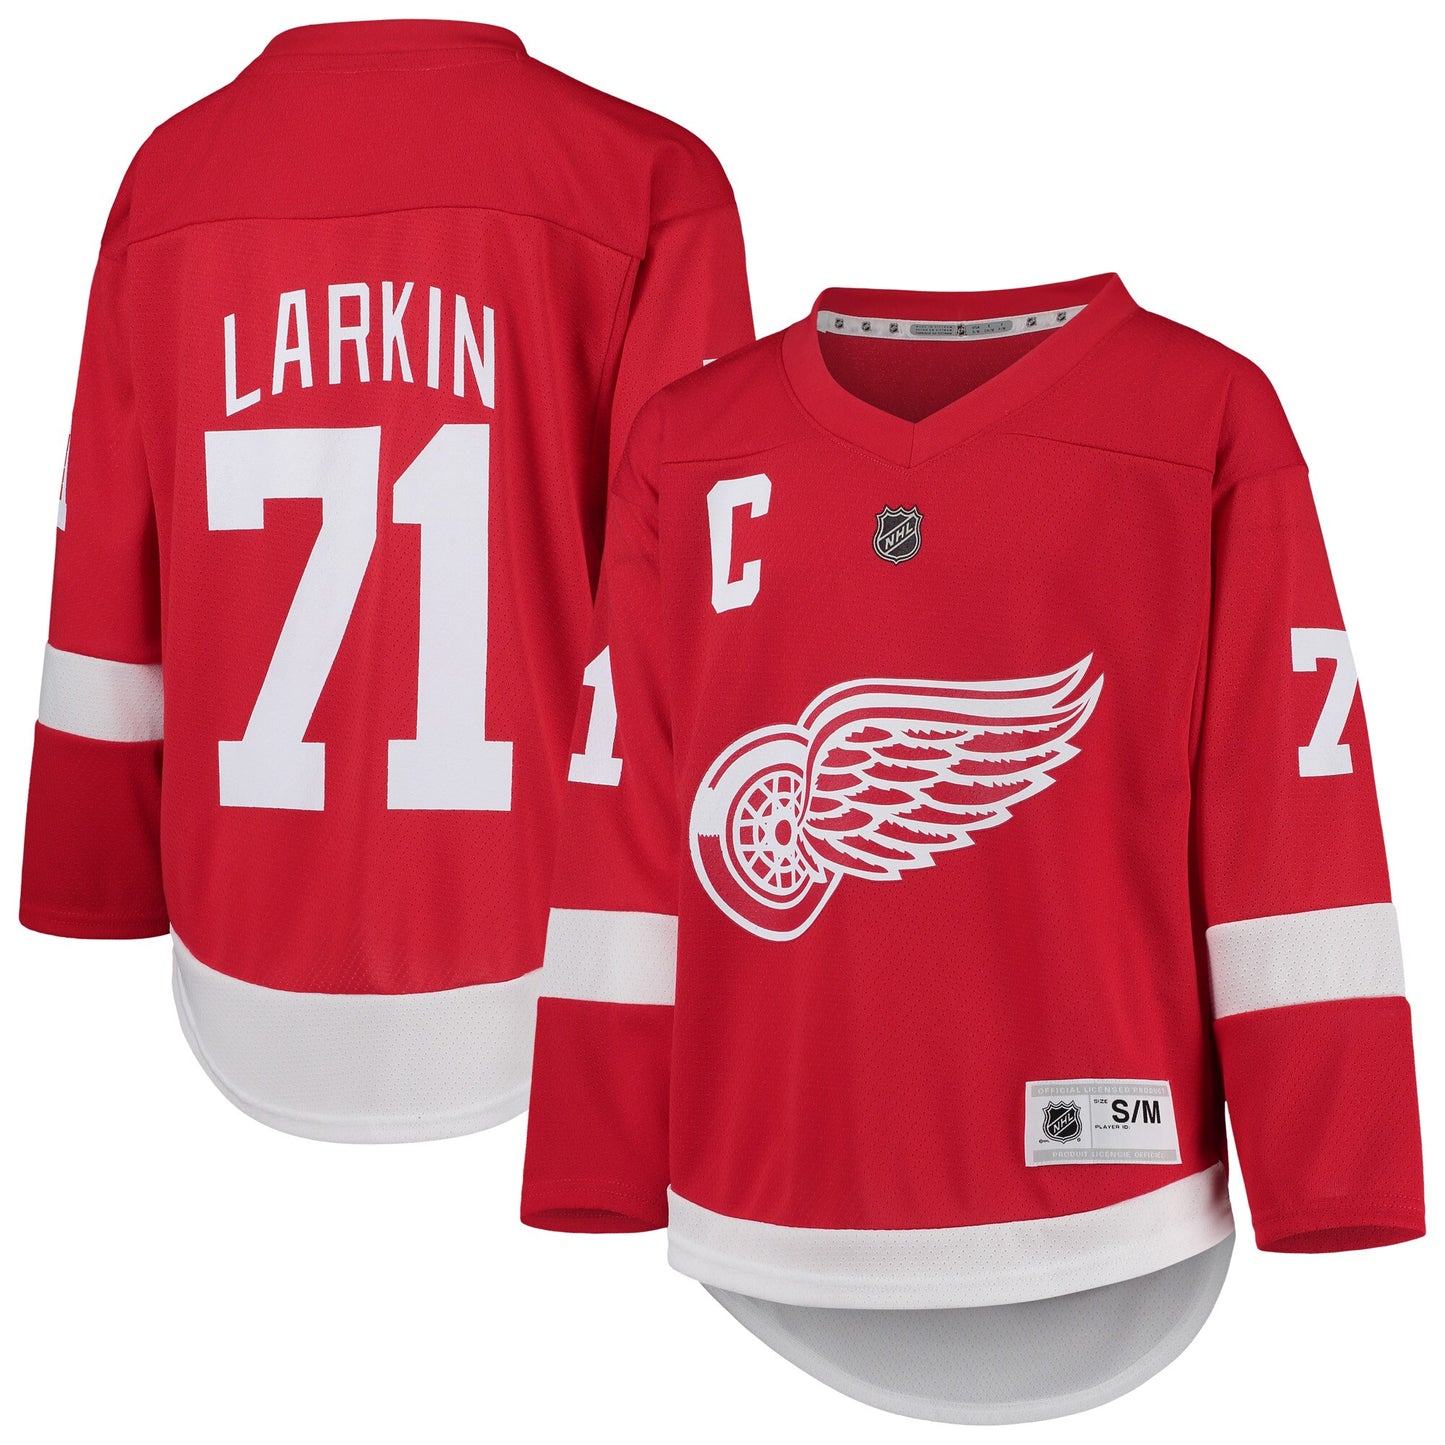 Dylan Larkin Detroit Red Wings Youth Home Replica Player Jersey - Red